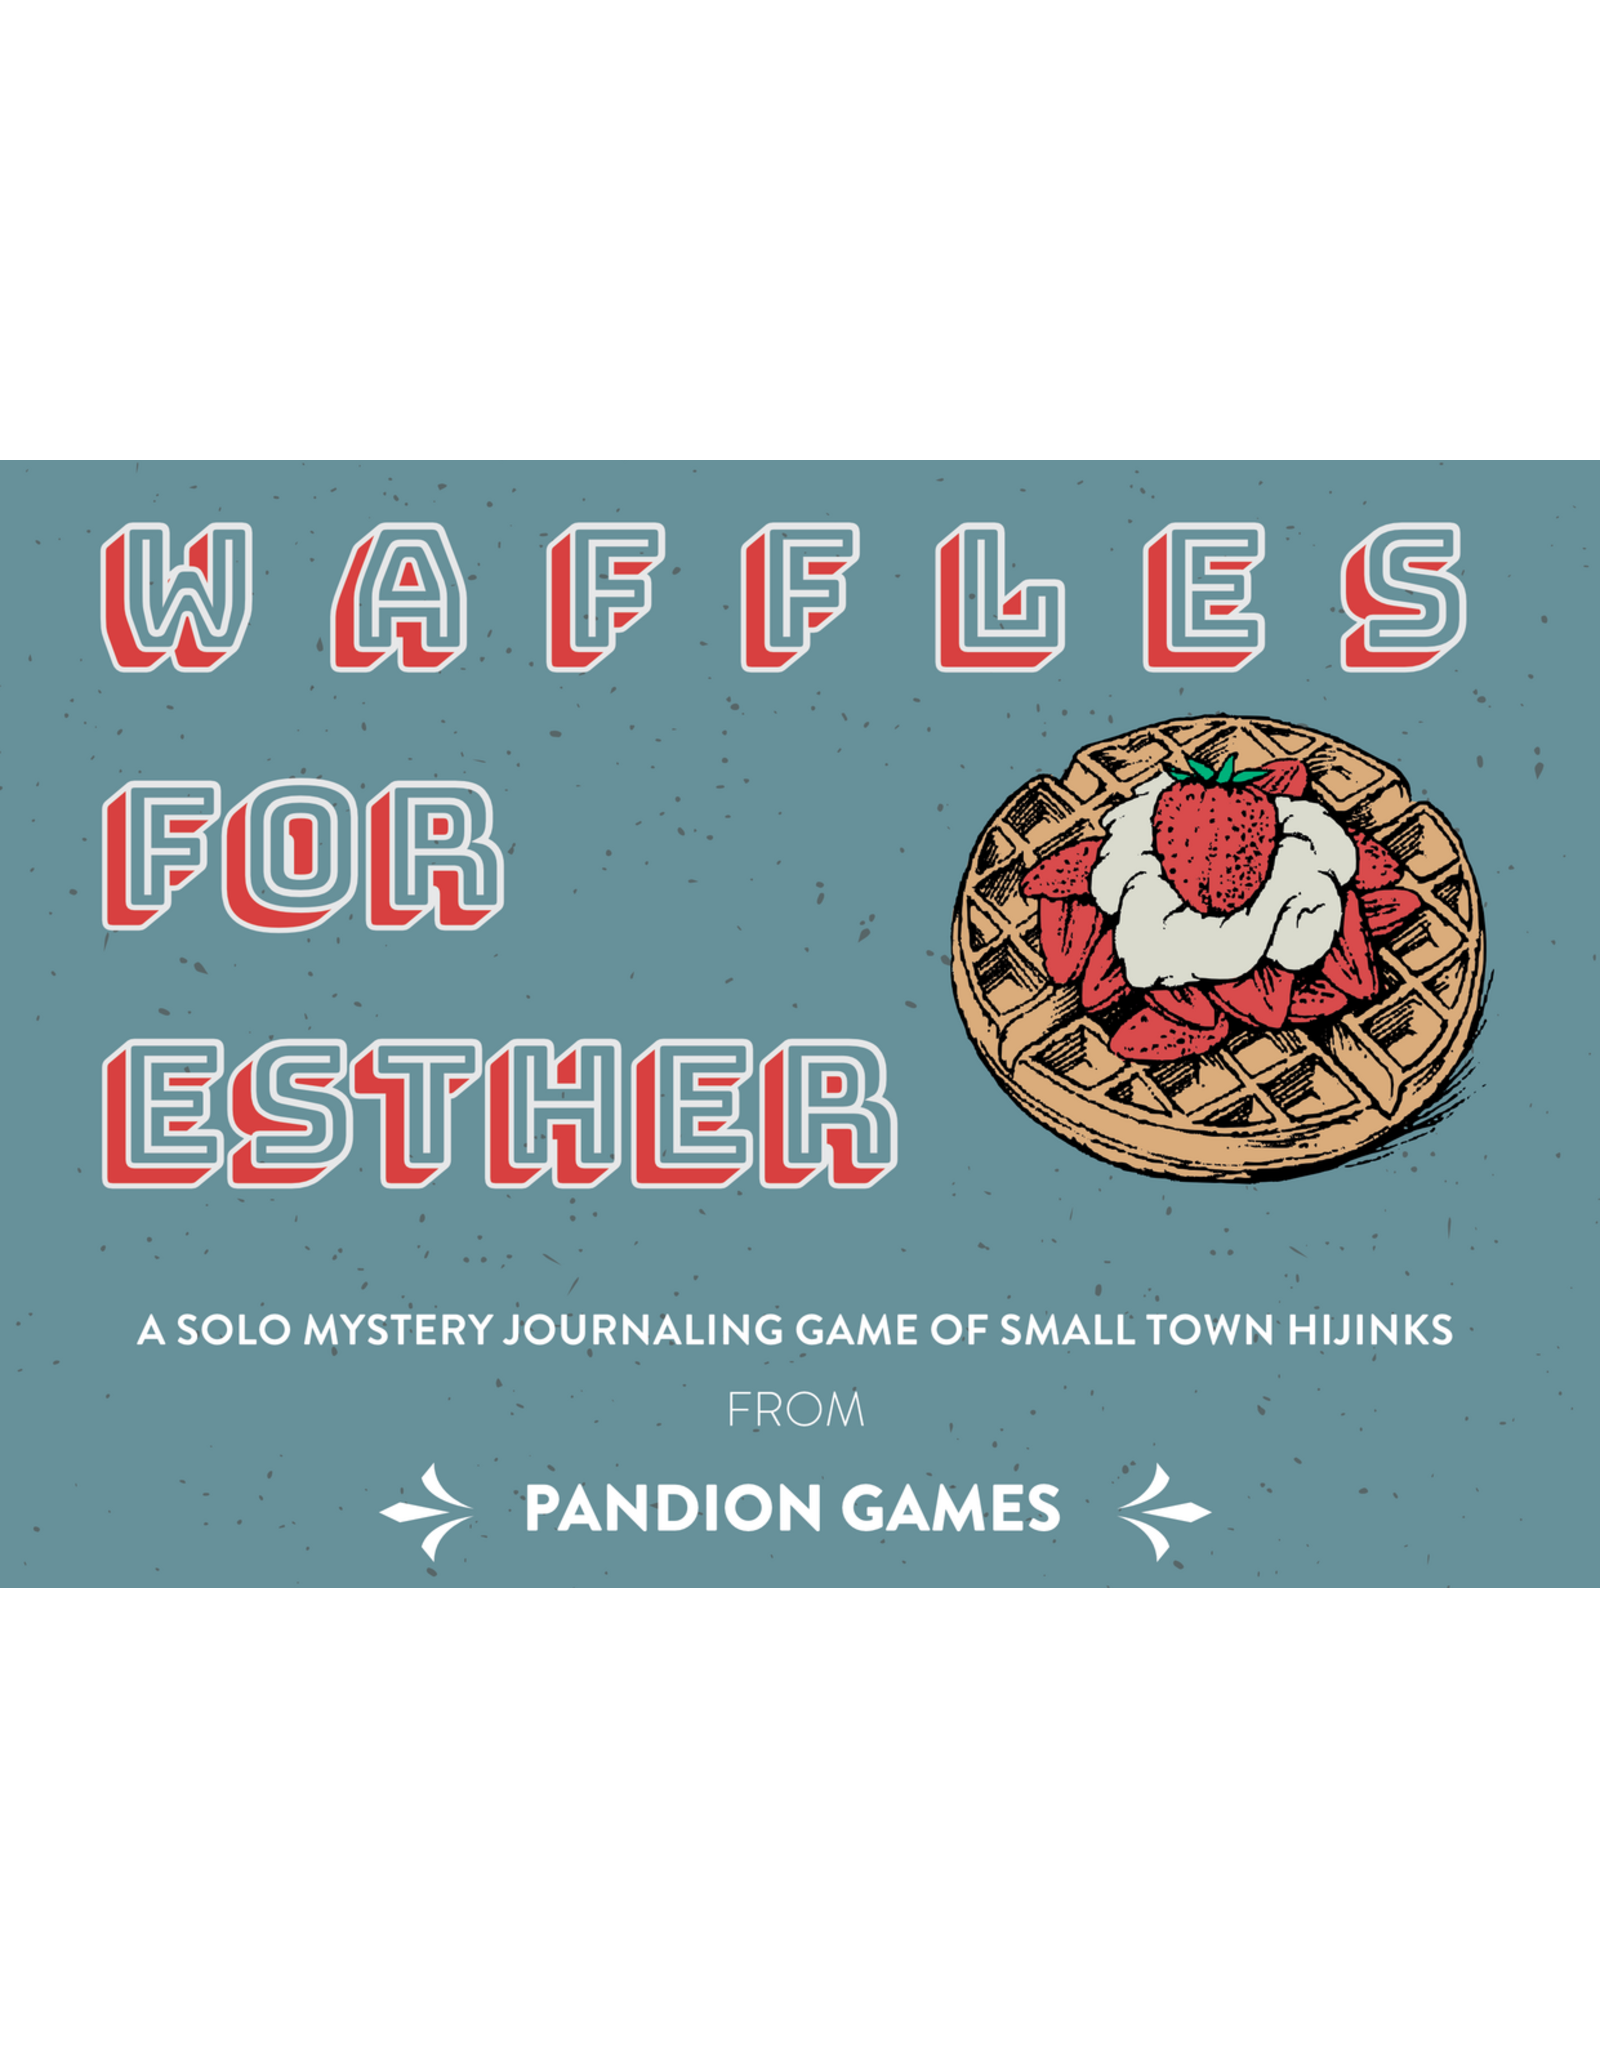 Waffles for Esther